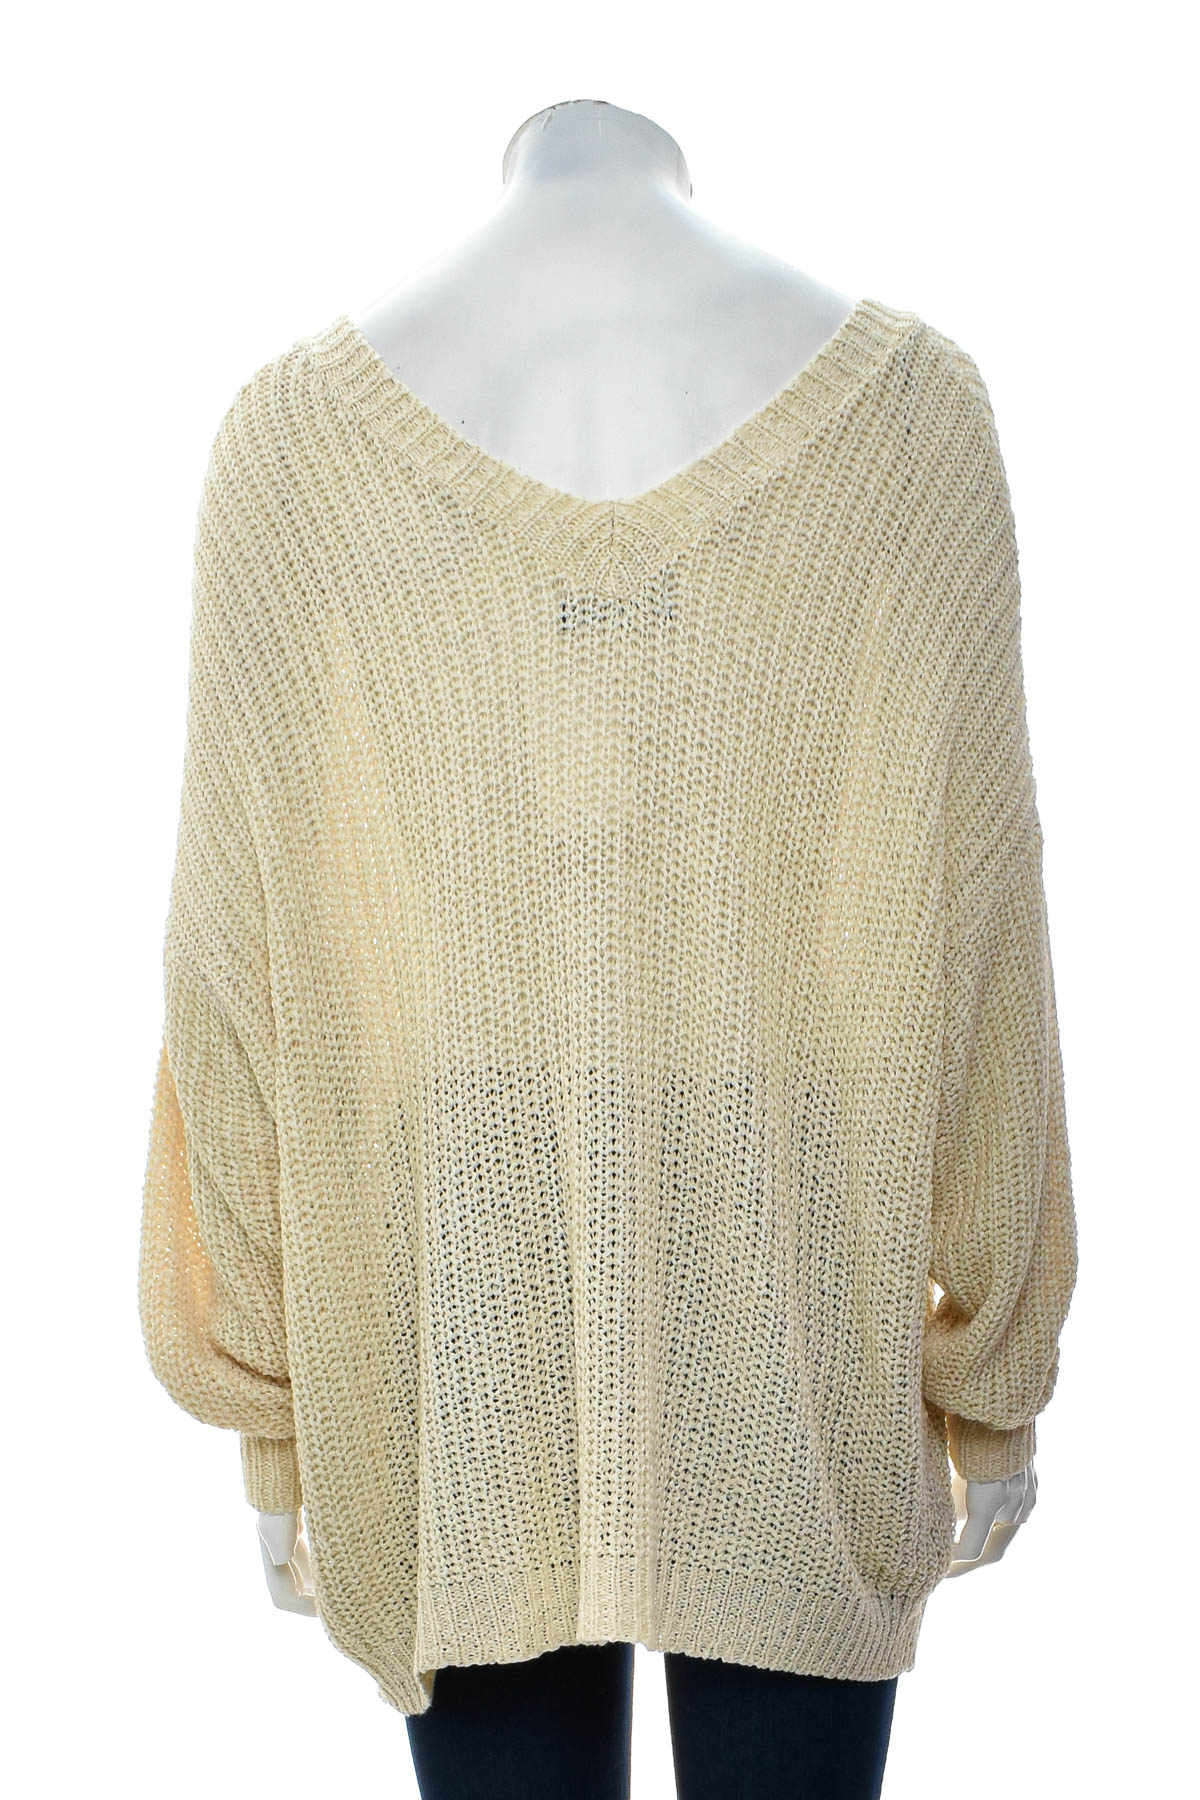 Women's sweater - Most Collection - 1